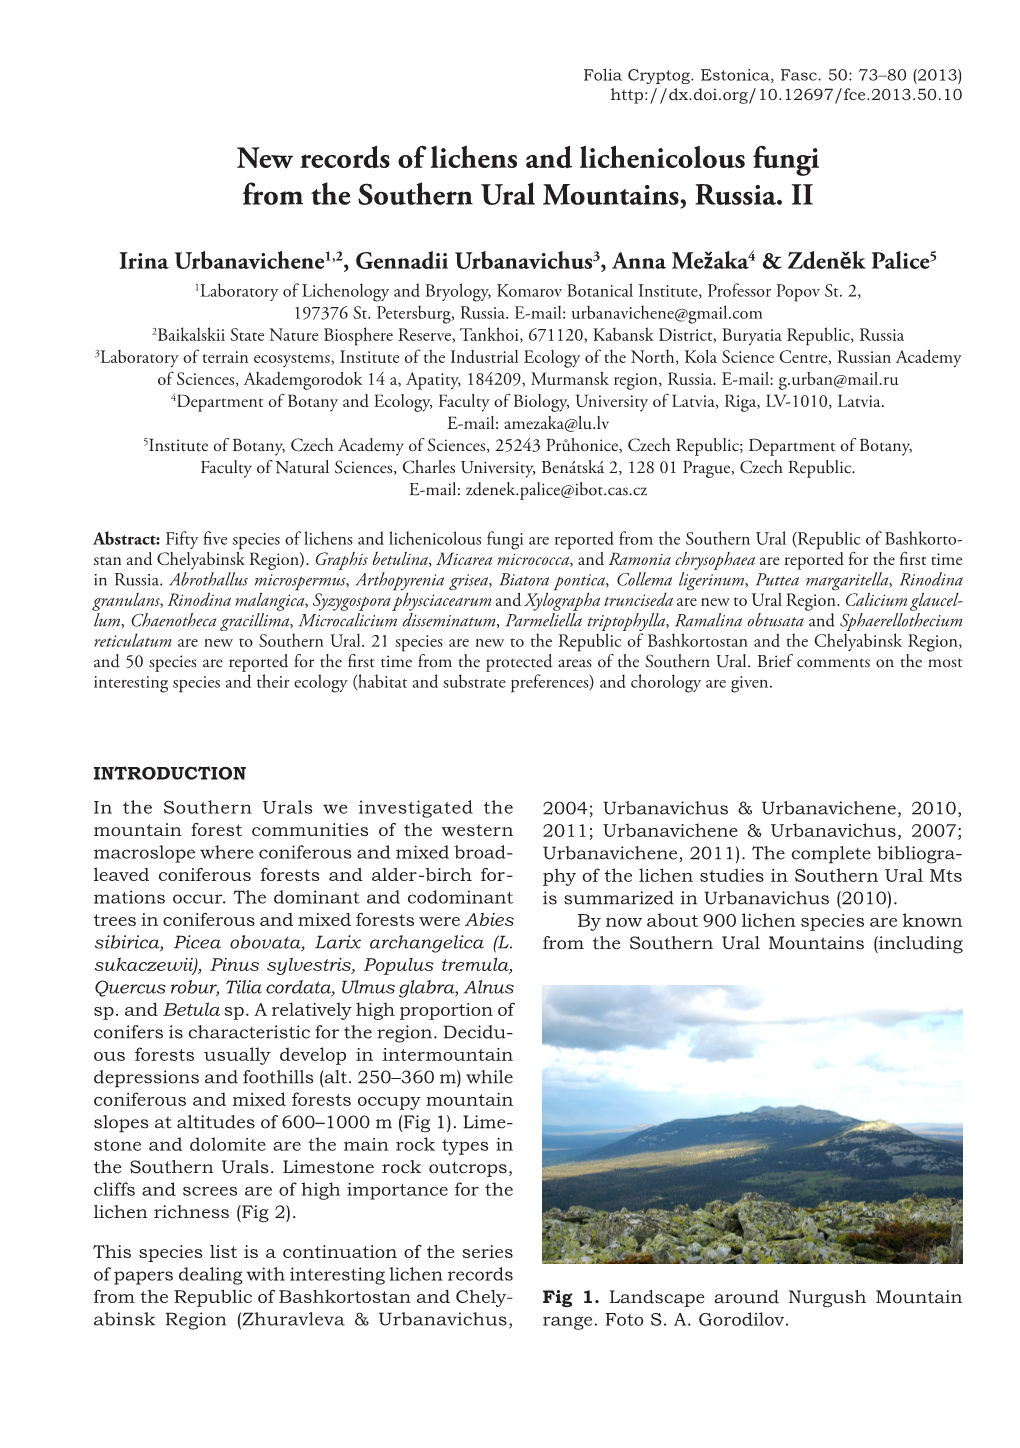 New Records of Lichens and Lichenicolous Fungi from the Southern Ural Mountains, Russia. II